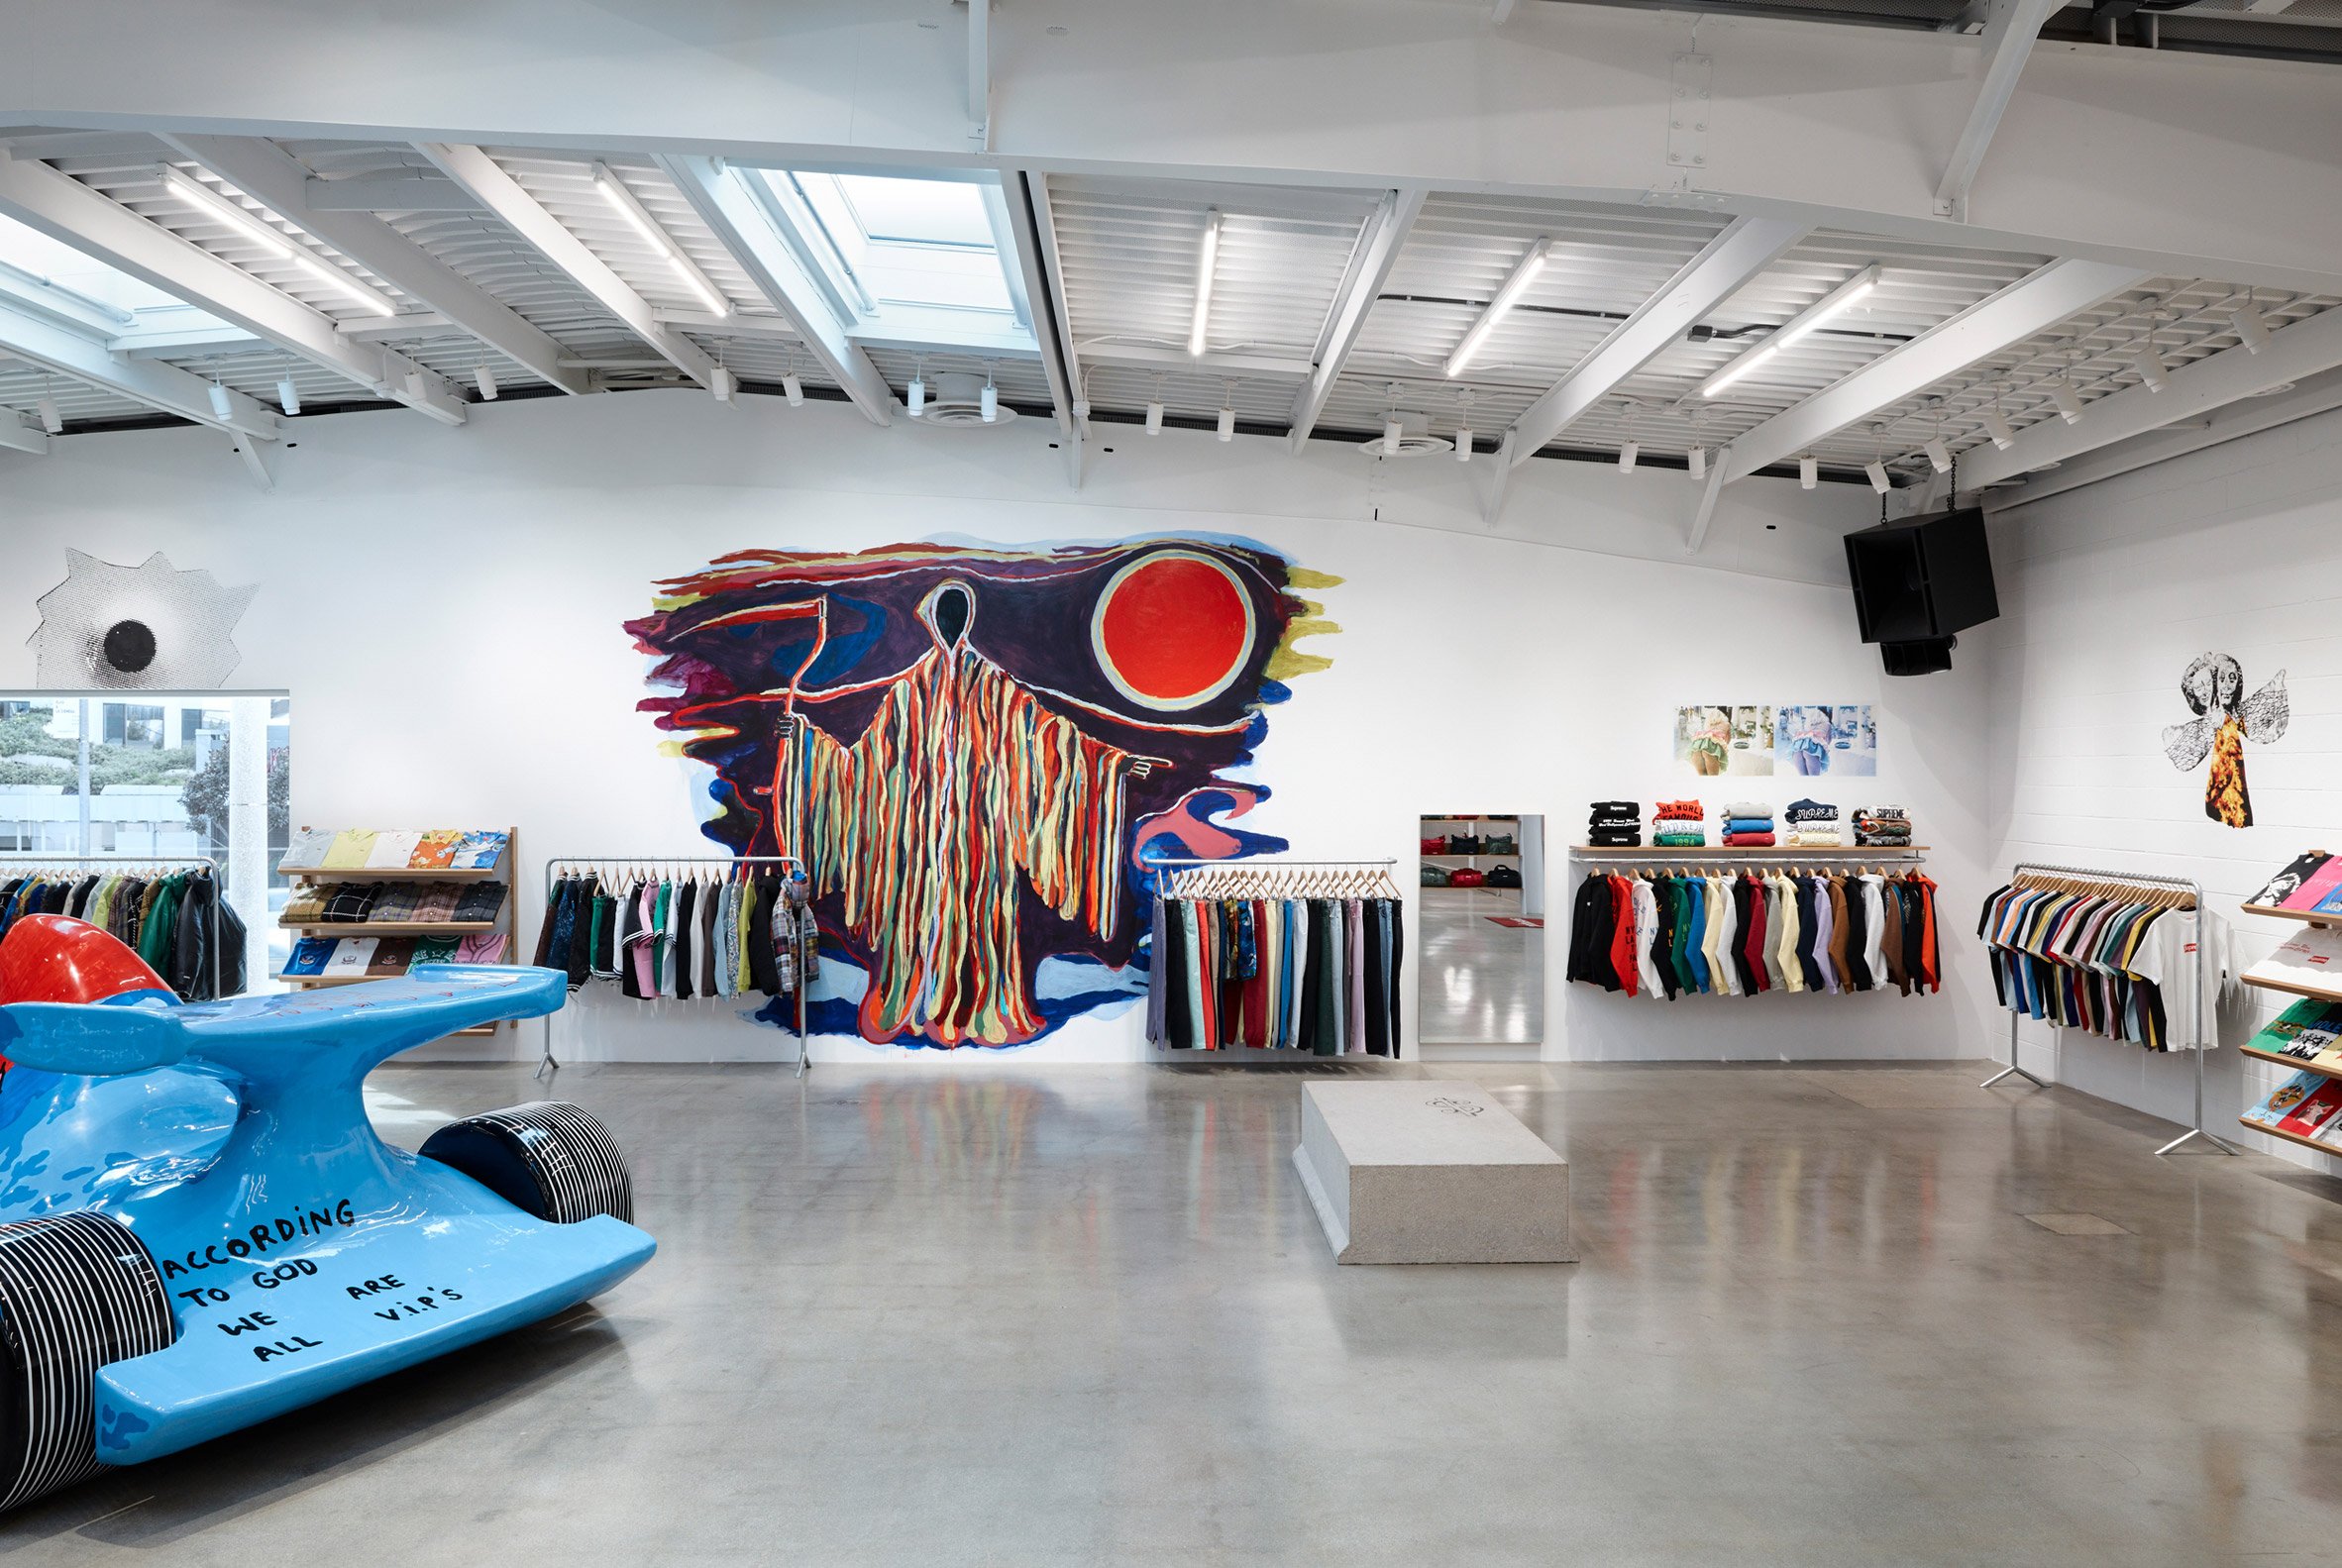 Supreme's Los Angeles flagship features its first fully floating